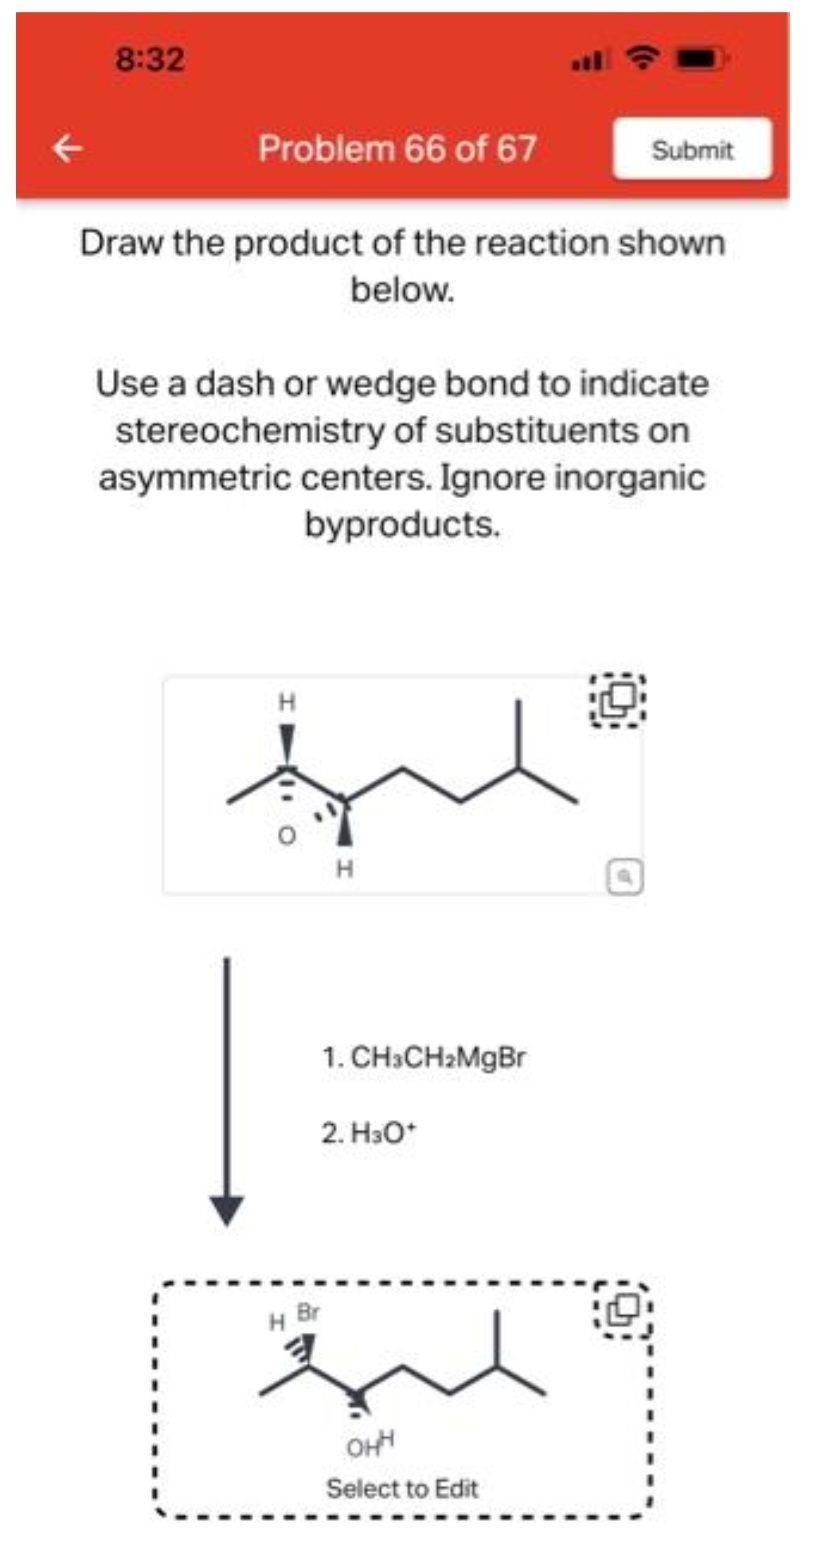 8:32
Problem 66 of 67
Draw the product of the reaction shown
below.
Use a dash or wedge bond to indicate
stereochemistry of substituents on
asymmetric centers. Ignore inorganic
byproducts.
H
H
Submit
1. CH3CH₂MgBr
2. H3O+
H Br
que
OHH
Select to Edit